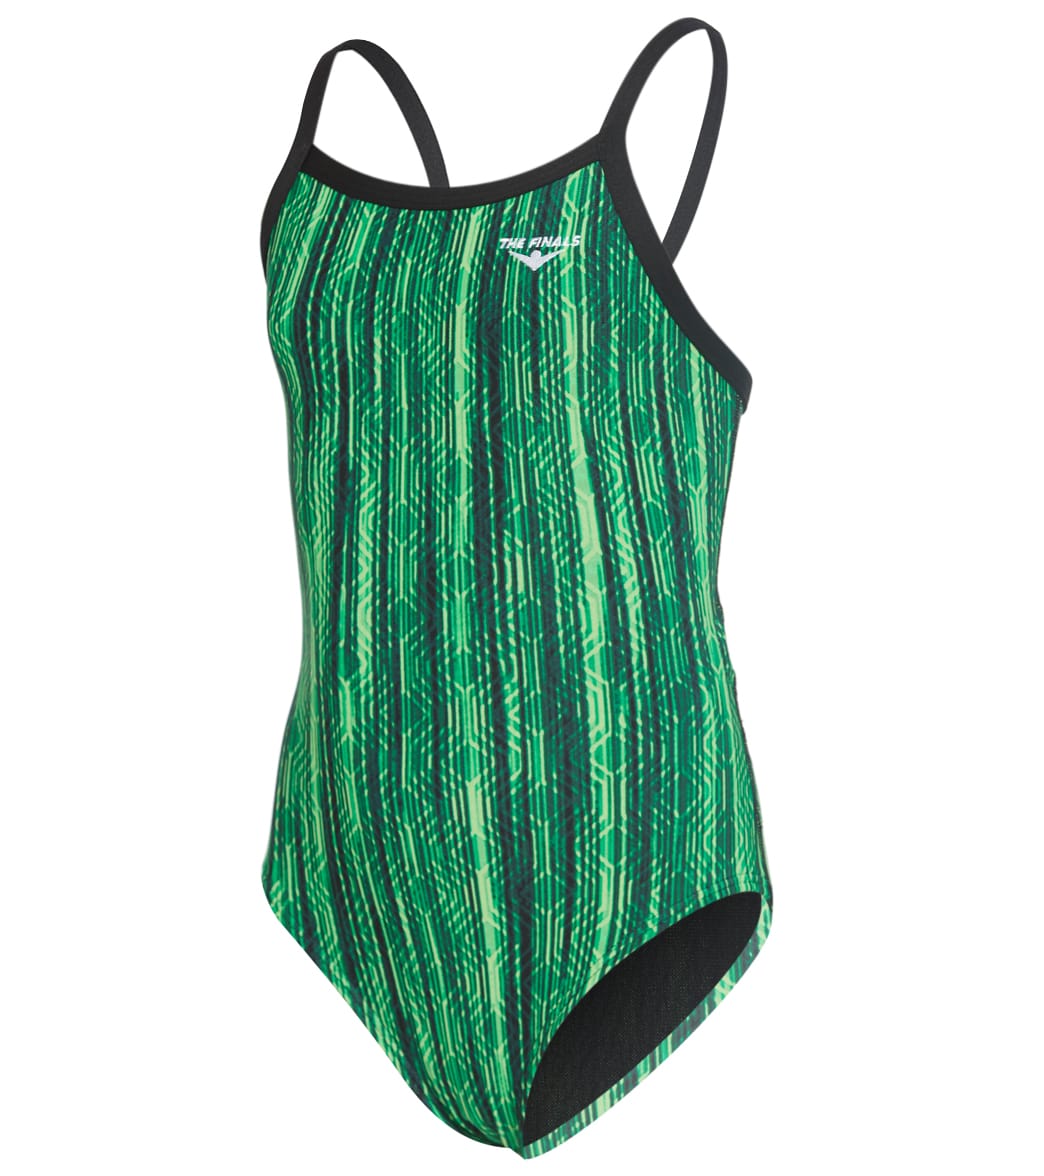 The Finals Girls Zircon Butterfly Back One Piece Swimsuit